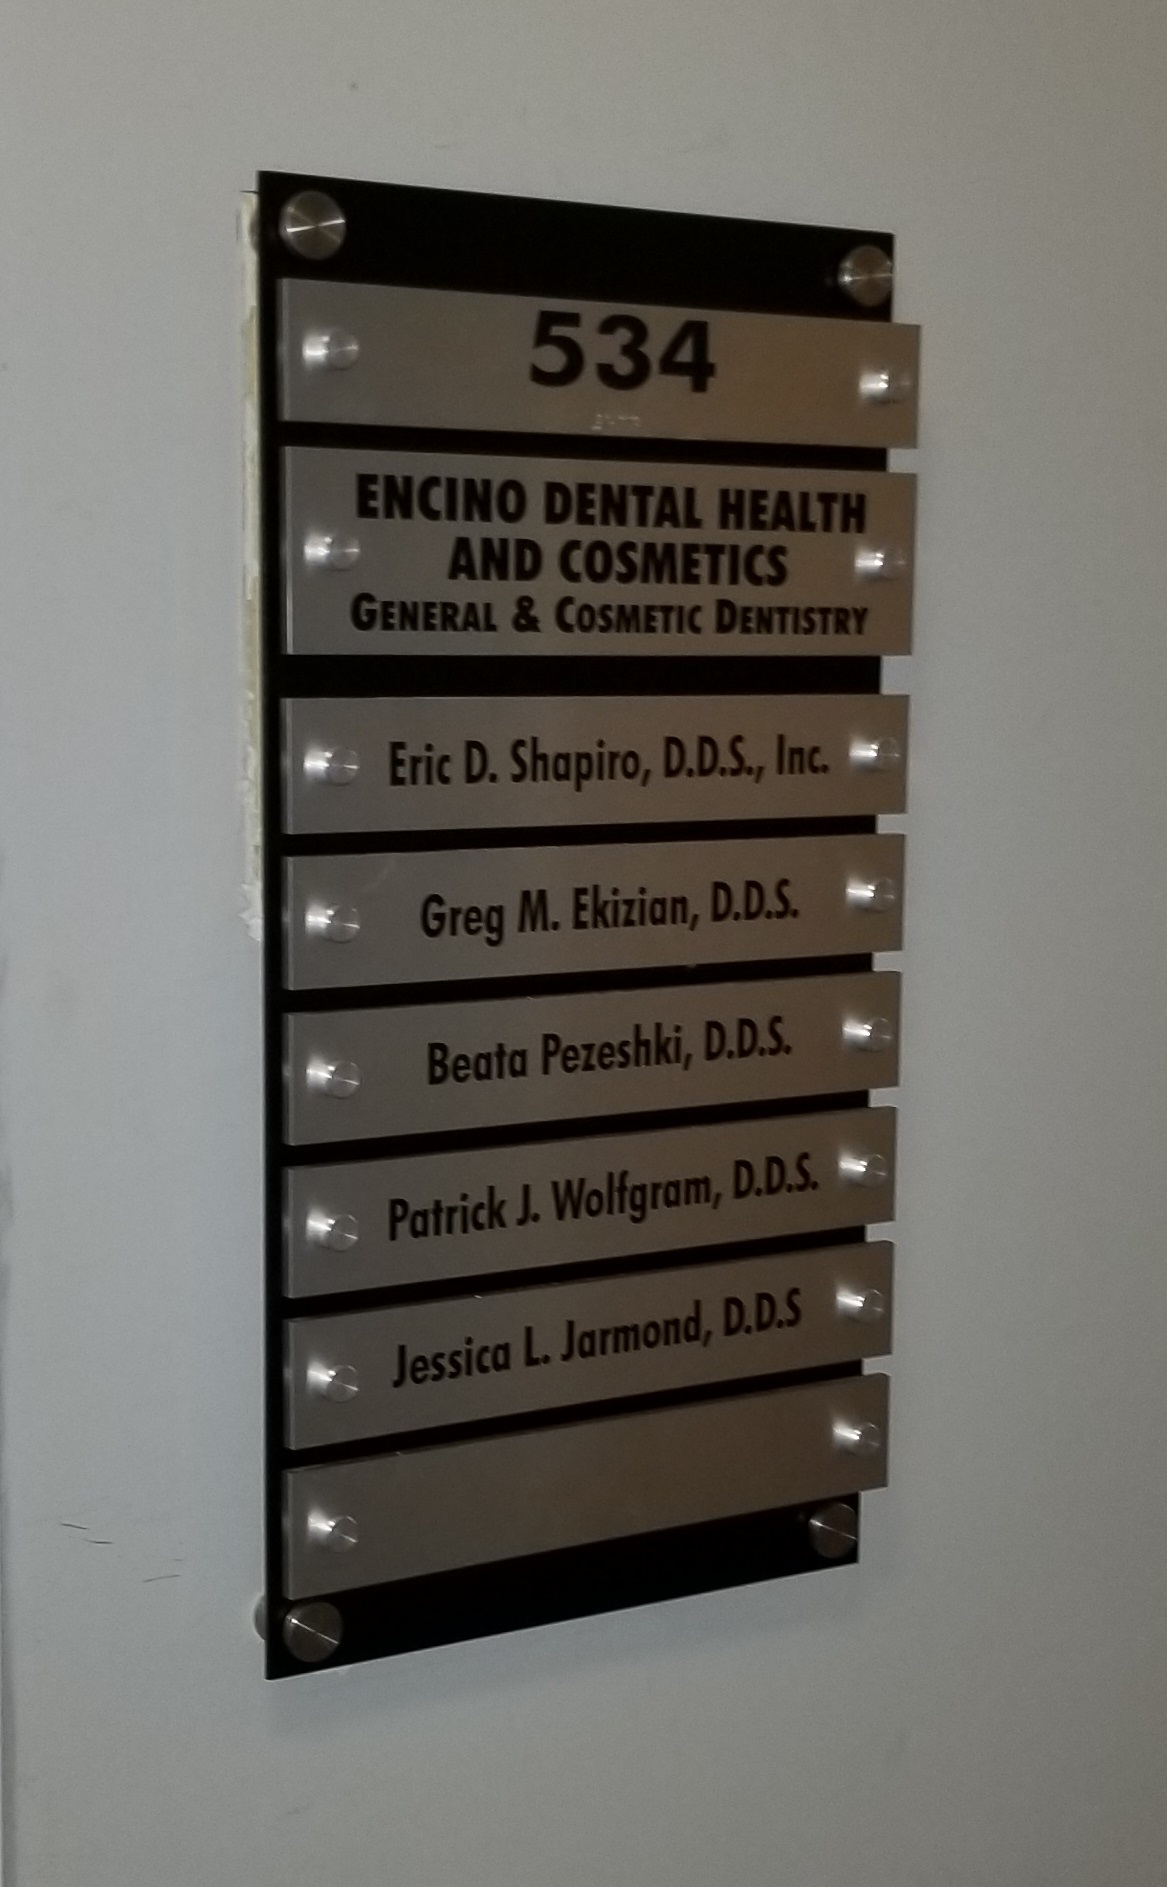 We fabricated and installed this directory suite plaque with changeable doctor names for Ethan Christopher Property Management's Encino location.